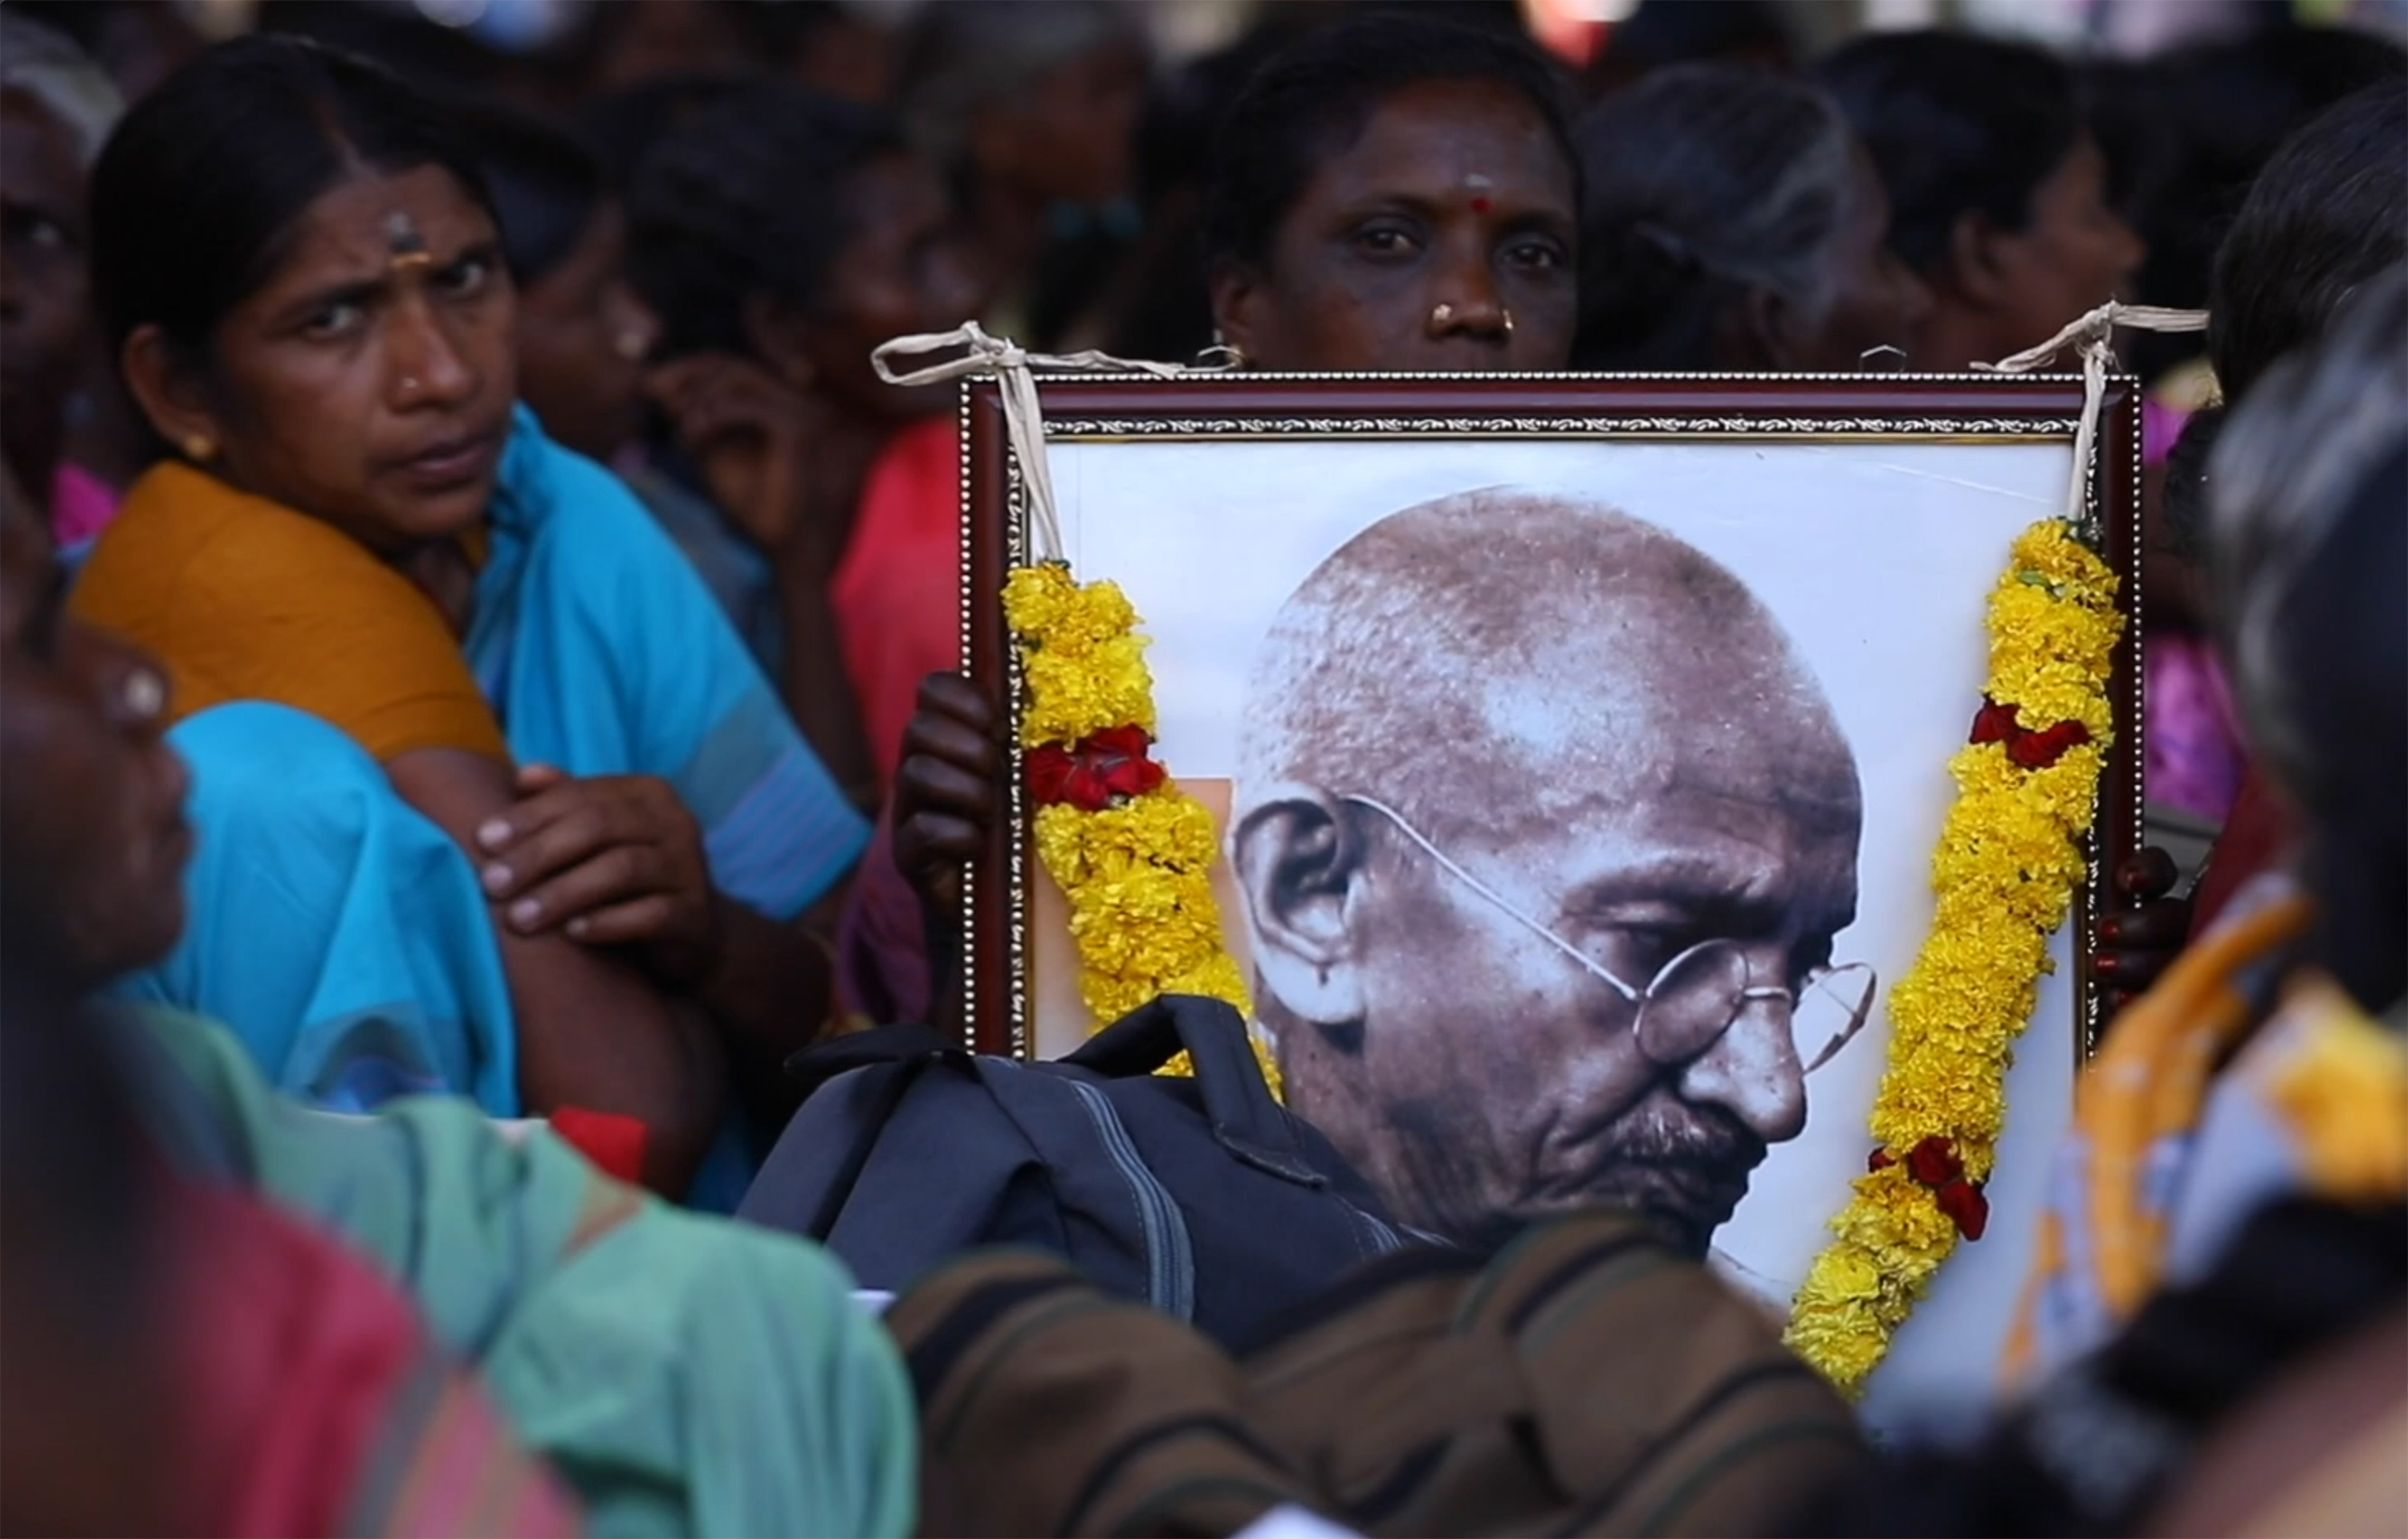 Protesters holding an image of Gandhi